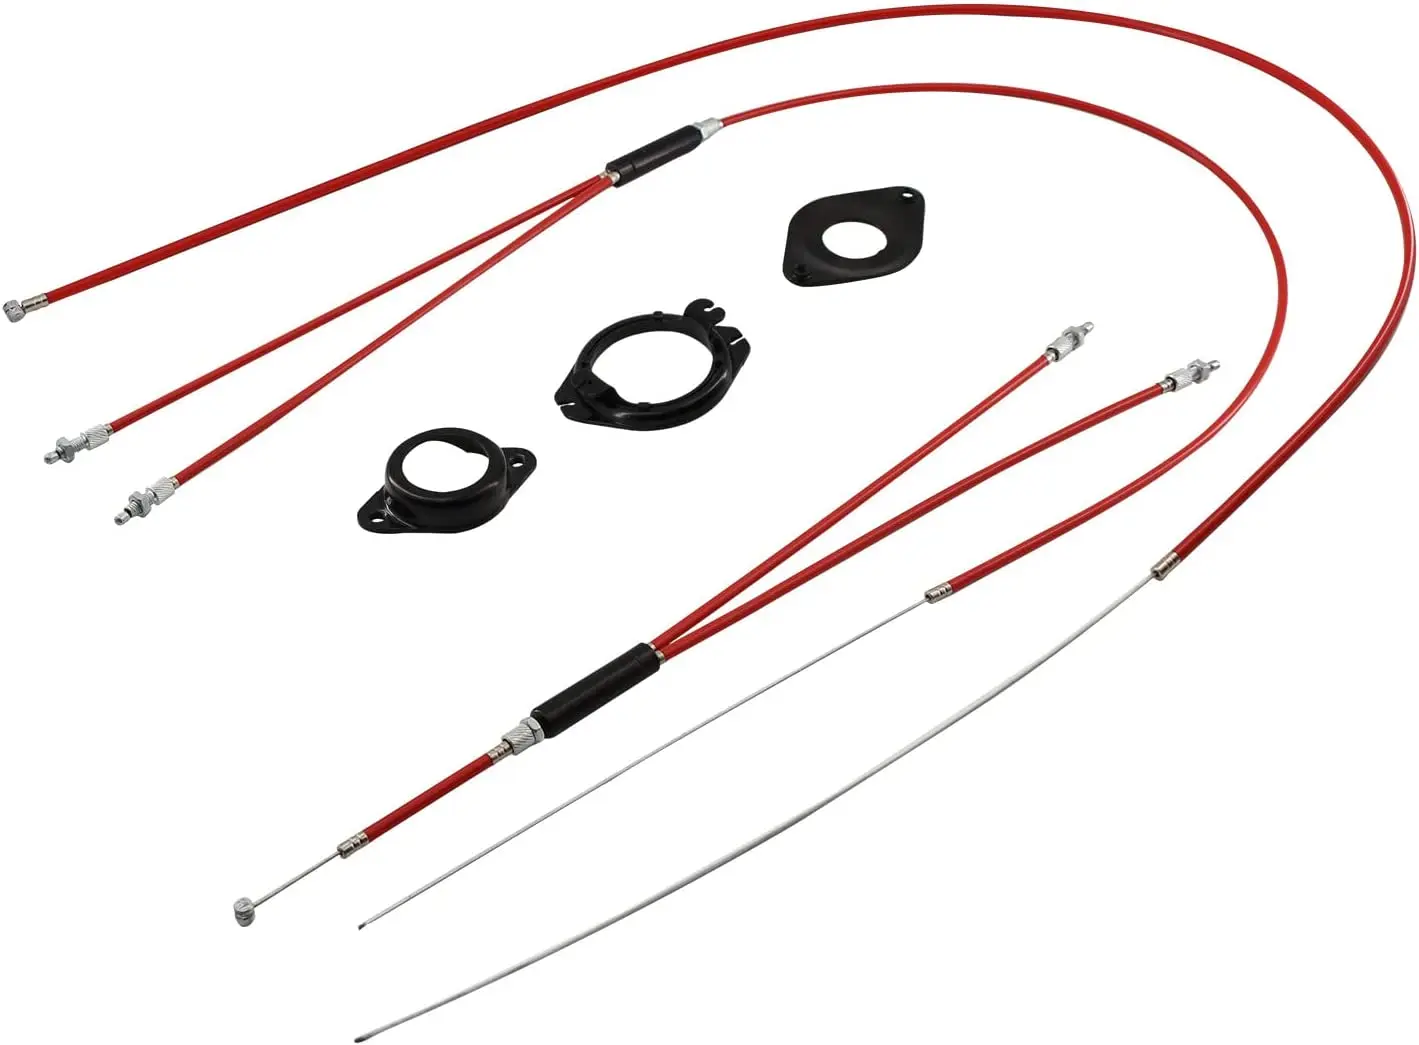 BMX Bike Brake Cable Set Gyro Brake Cables Front and Rear Brake Set Bicycle Brake Cable Housing with Spinner Rotor Bike Replacem